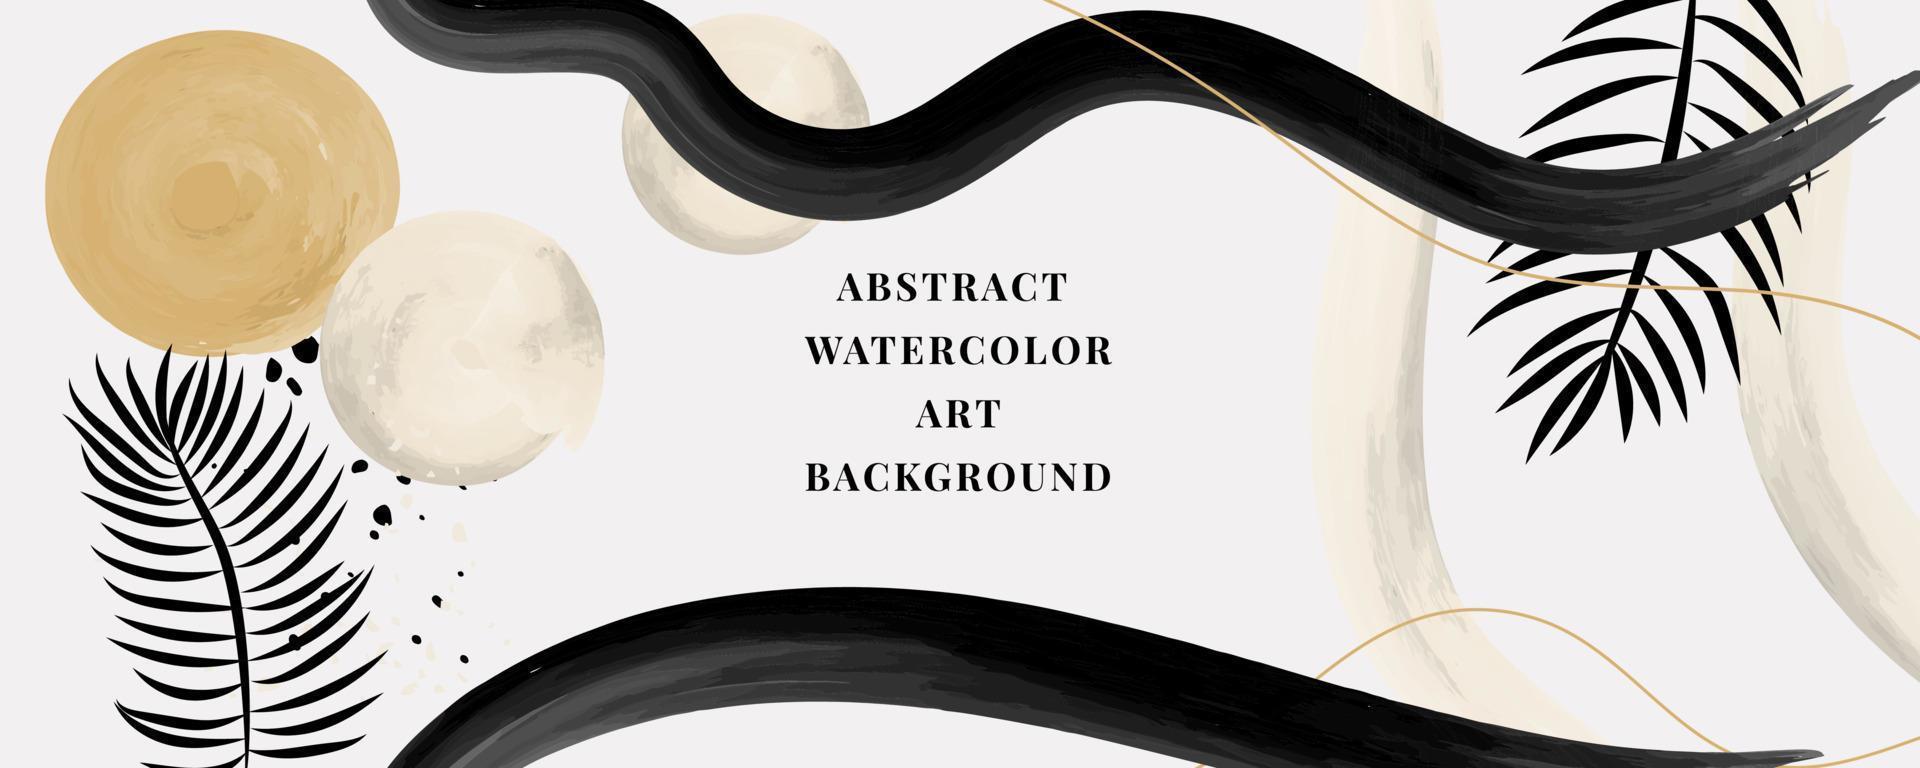 Vector background of watercolor art. Wallpaper design with a brush. black, yellow, white brushes, circles, palm leaves, abstract shapes. watercolor illustration for prints, wall drawings, covers